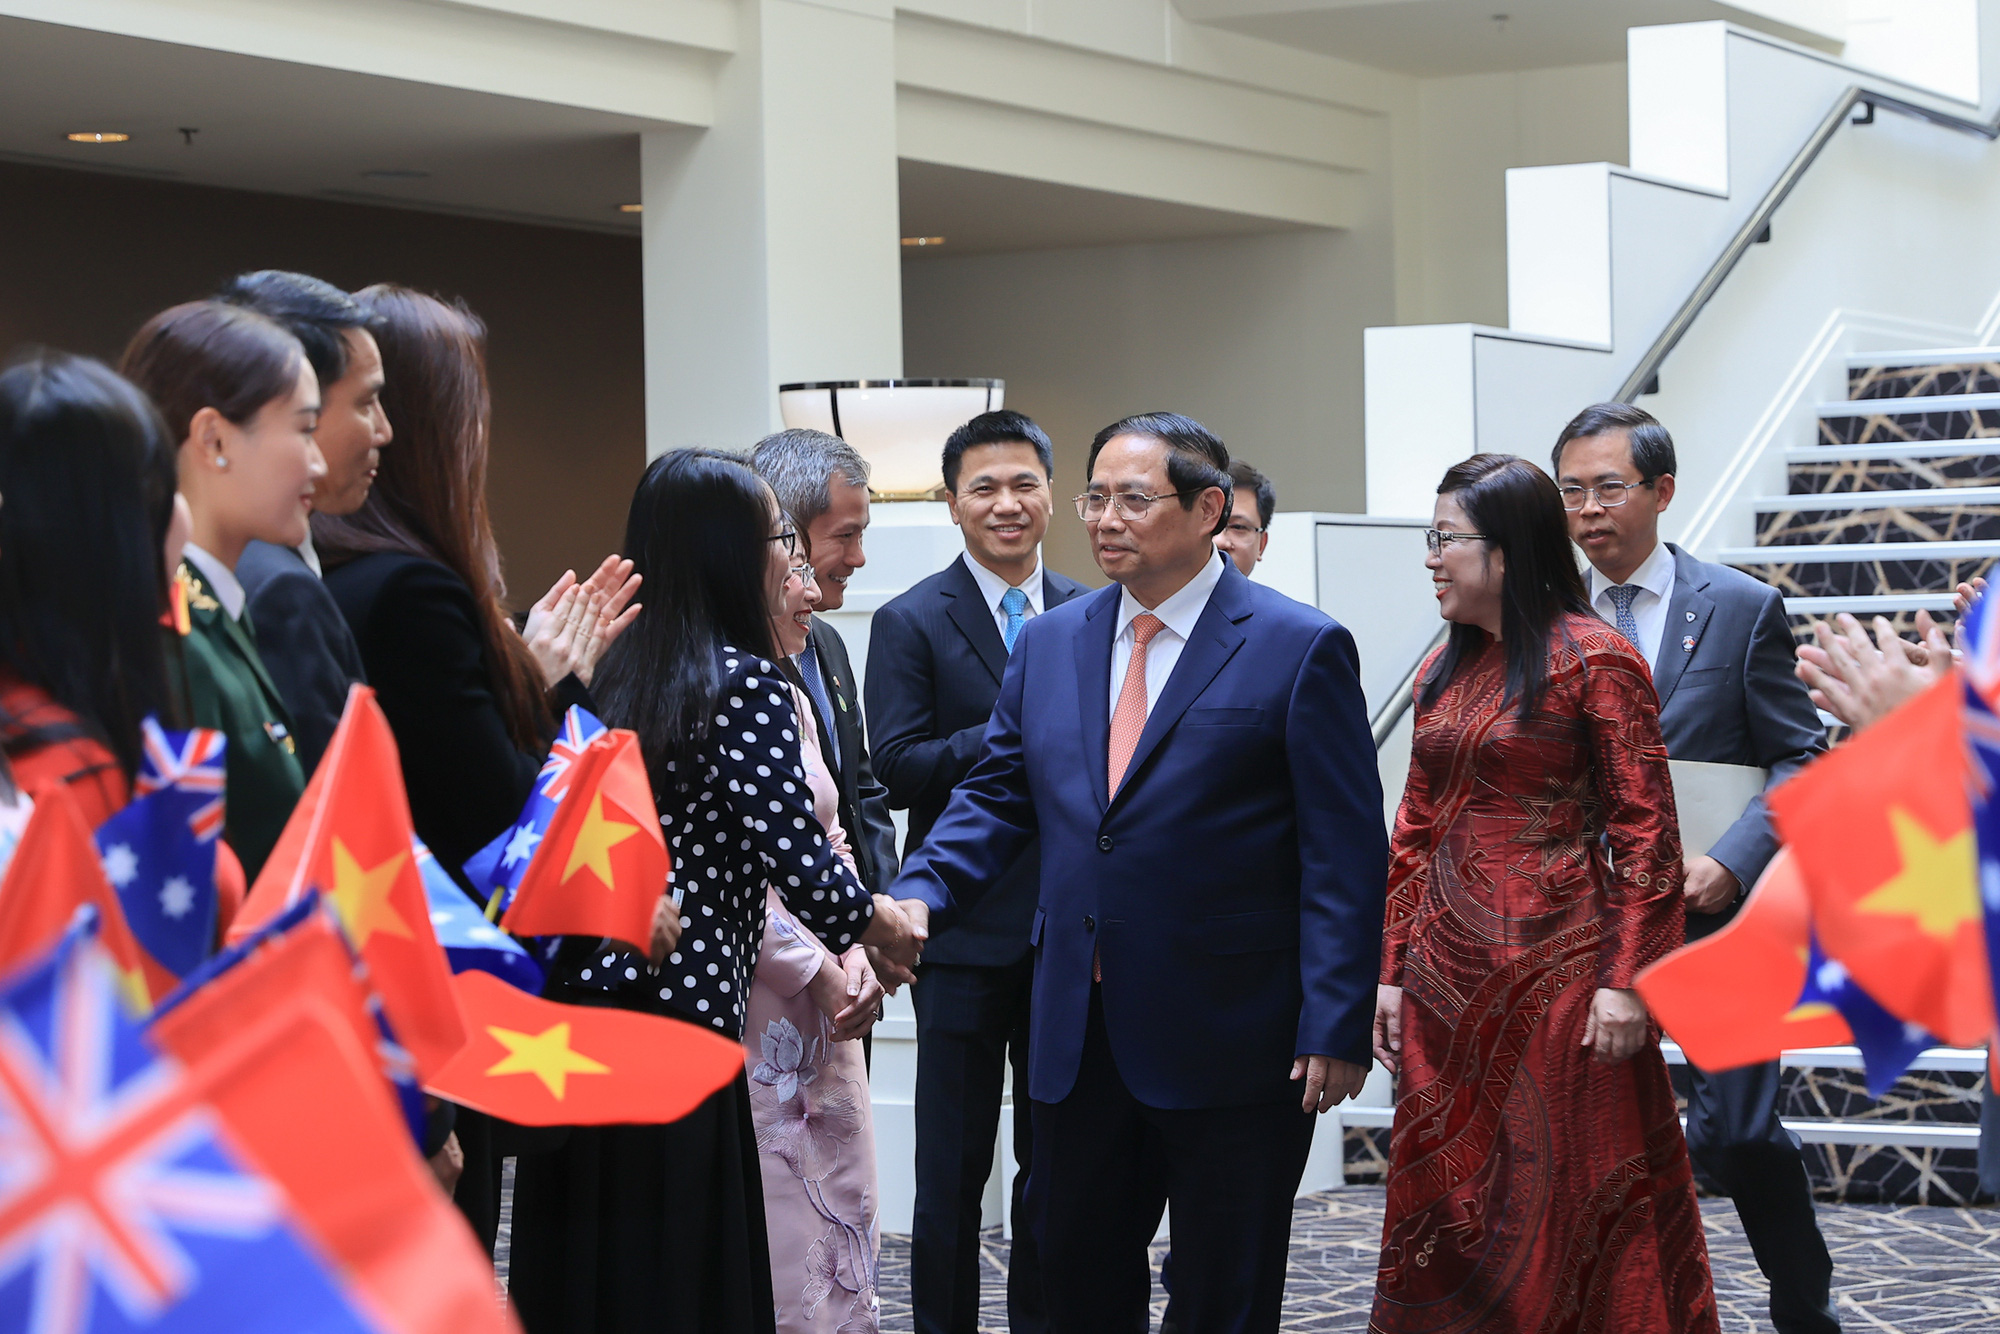 PM proposes ethnic minority recognition for Vietnamese community in Australia